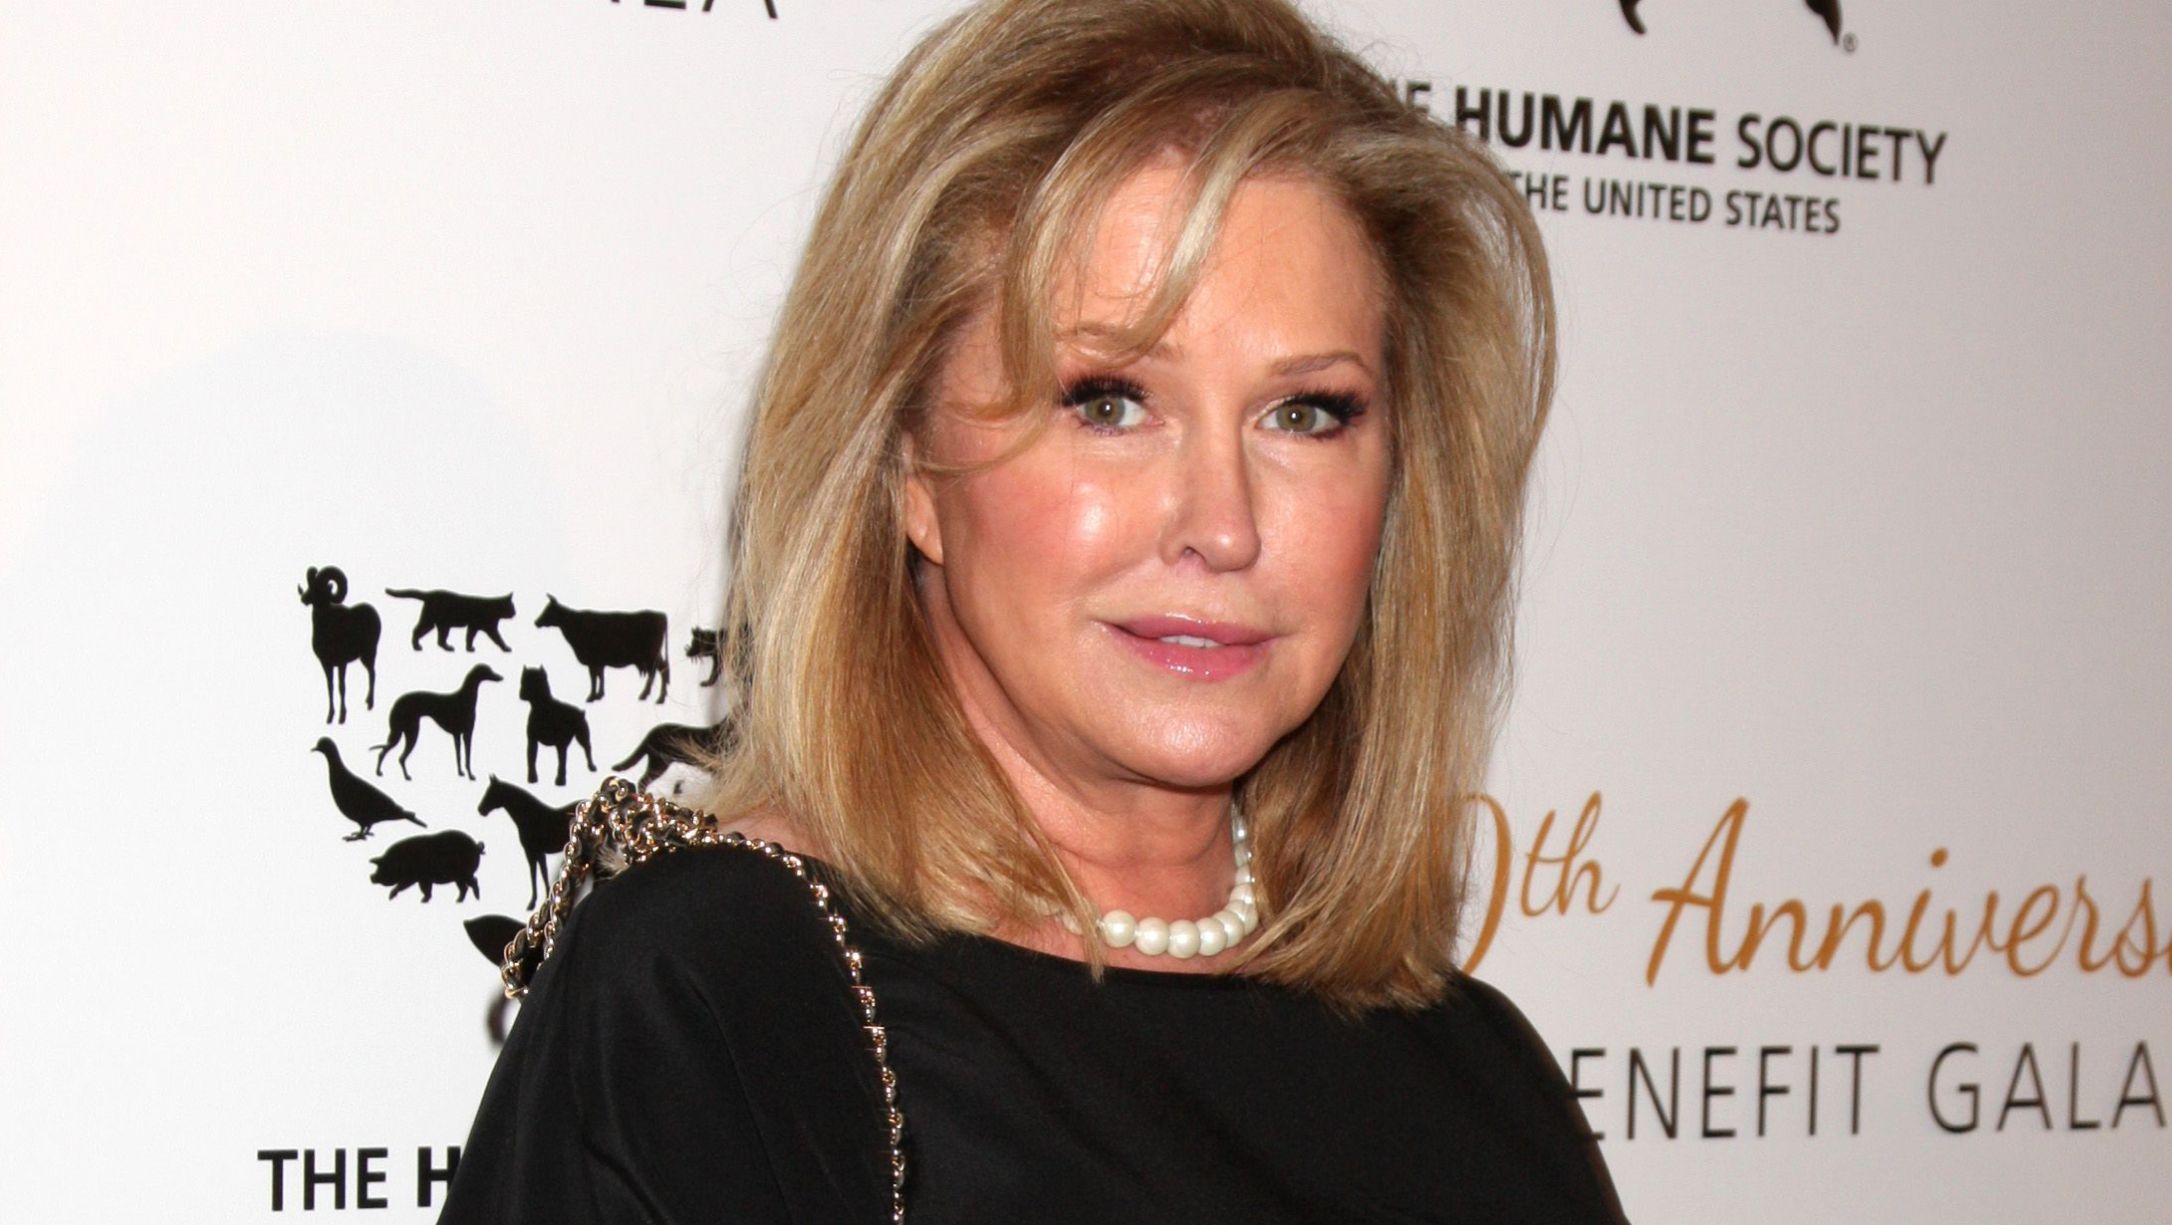 Kathy Hilton wears a pearl necklace and black dress.